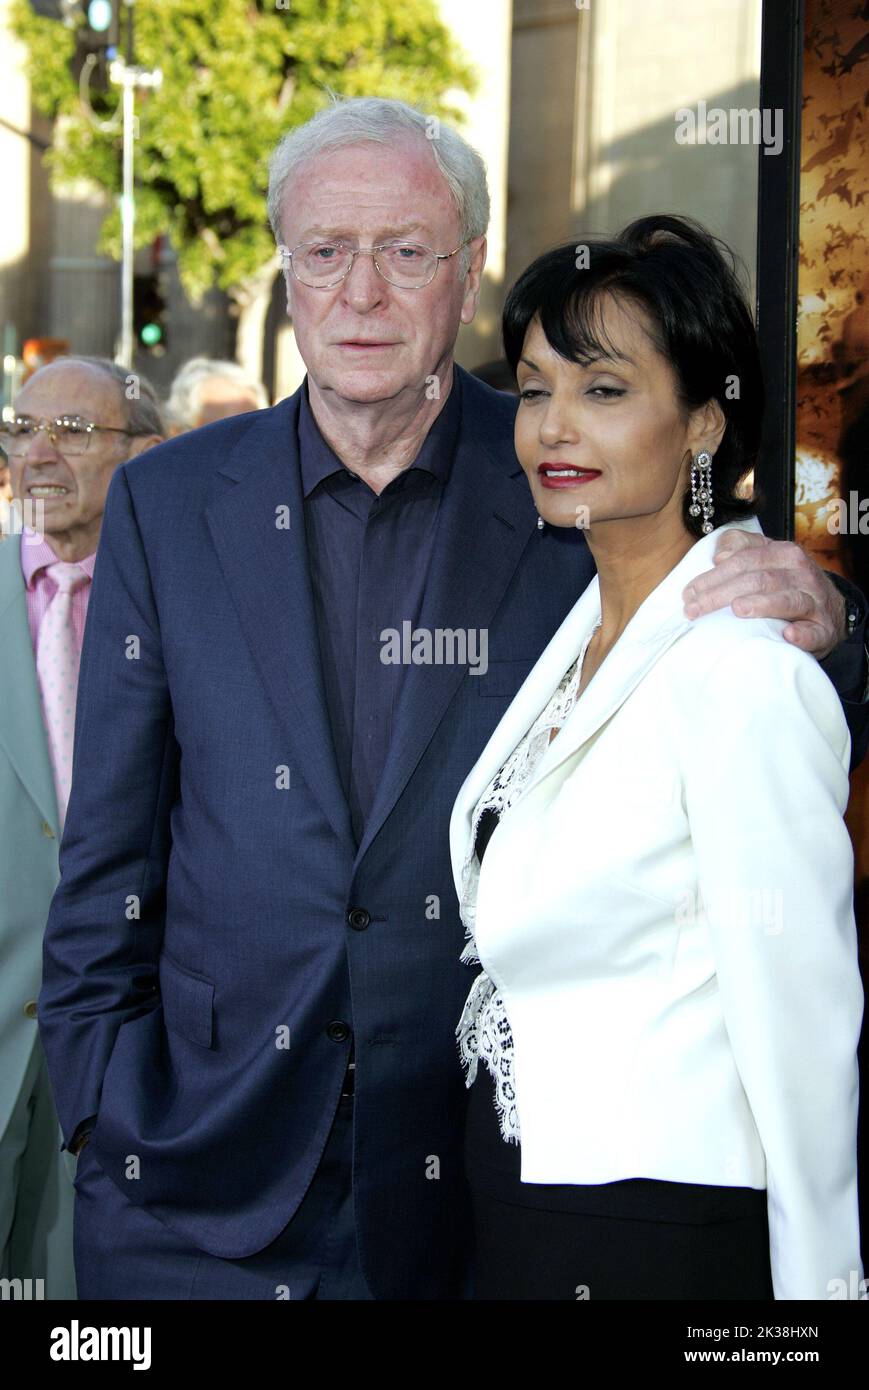 SIR MICHAEL CAINE & SHAKIRA ACTOR & WIFE BATMAN BEGINS CHINESE THEATRE, HOLLYWOOD LOS ANGELES, USA 06/06/2005 LAM51608 Stock Photo